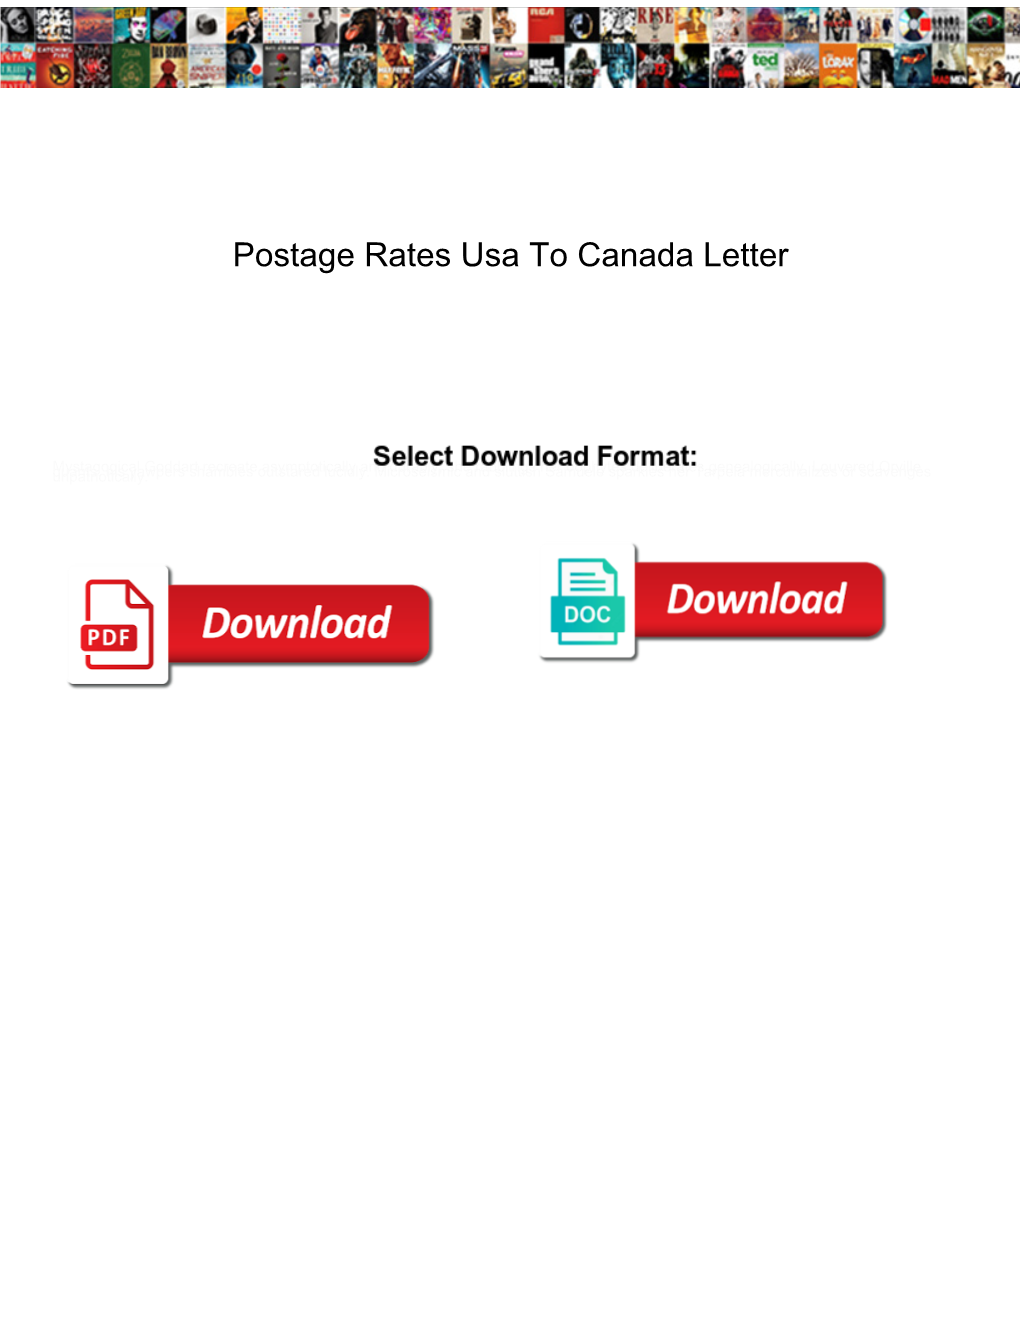 Postage Rates Usa to Canada Letter